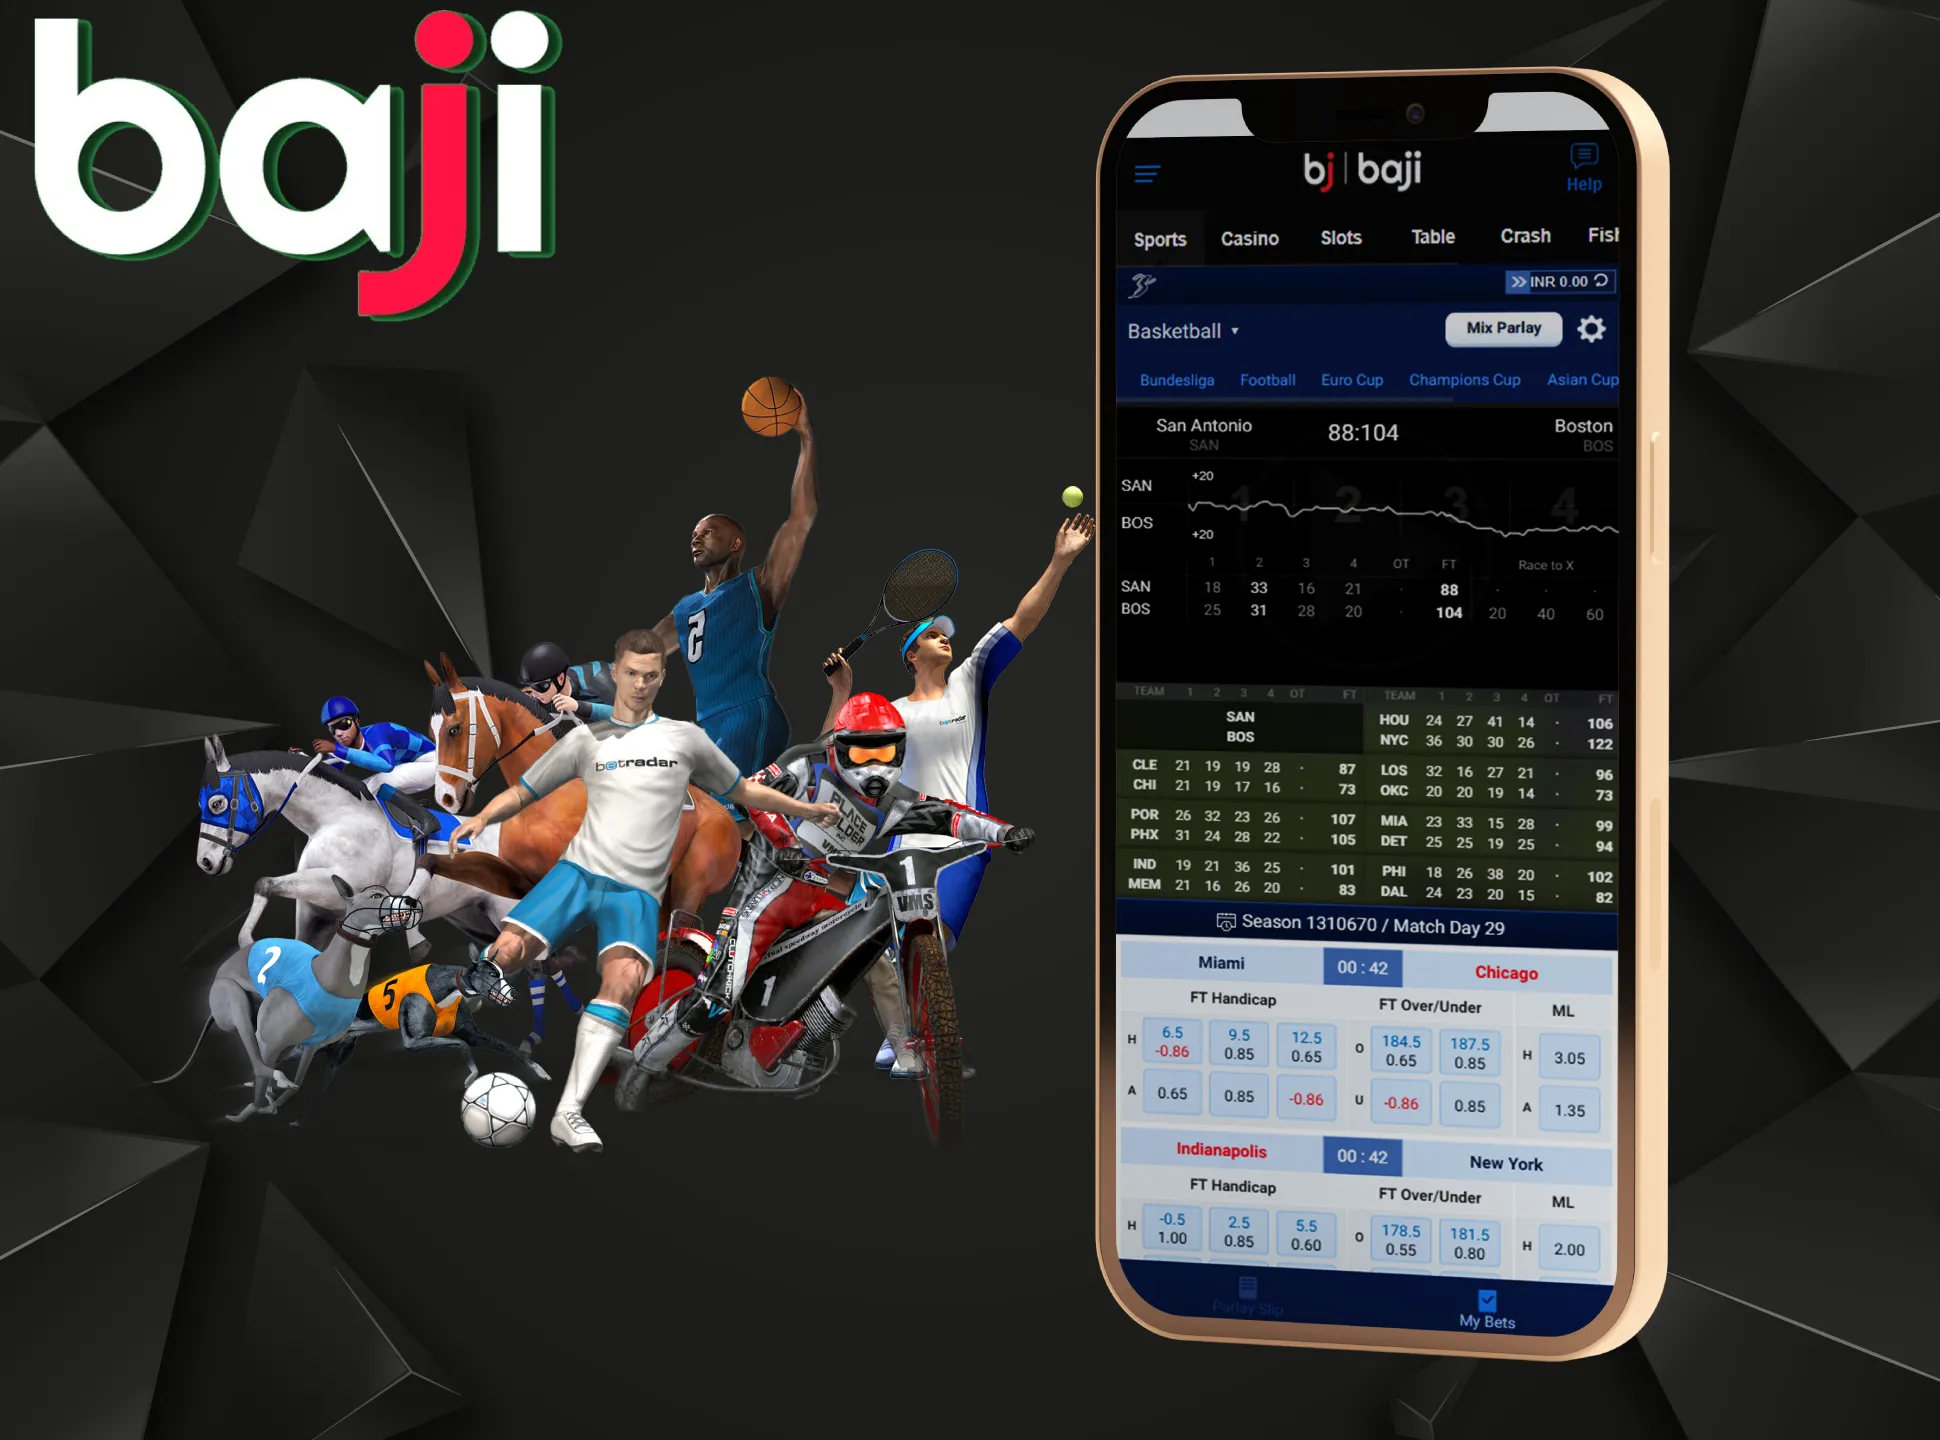 There are also different virtual sports markets in the Baji sportsbook.